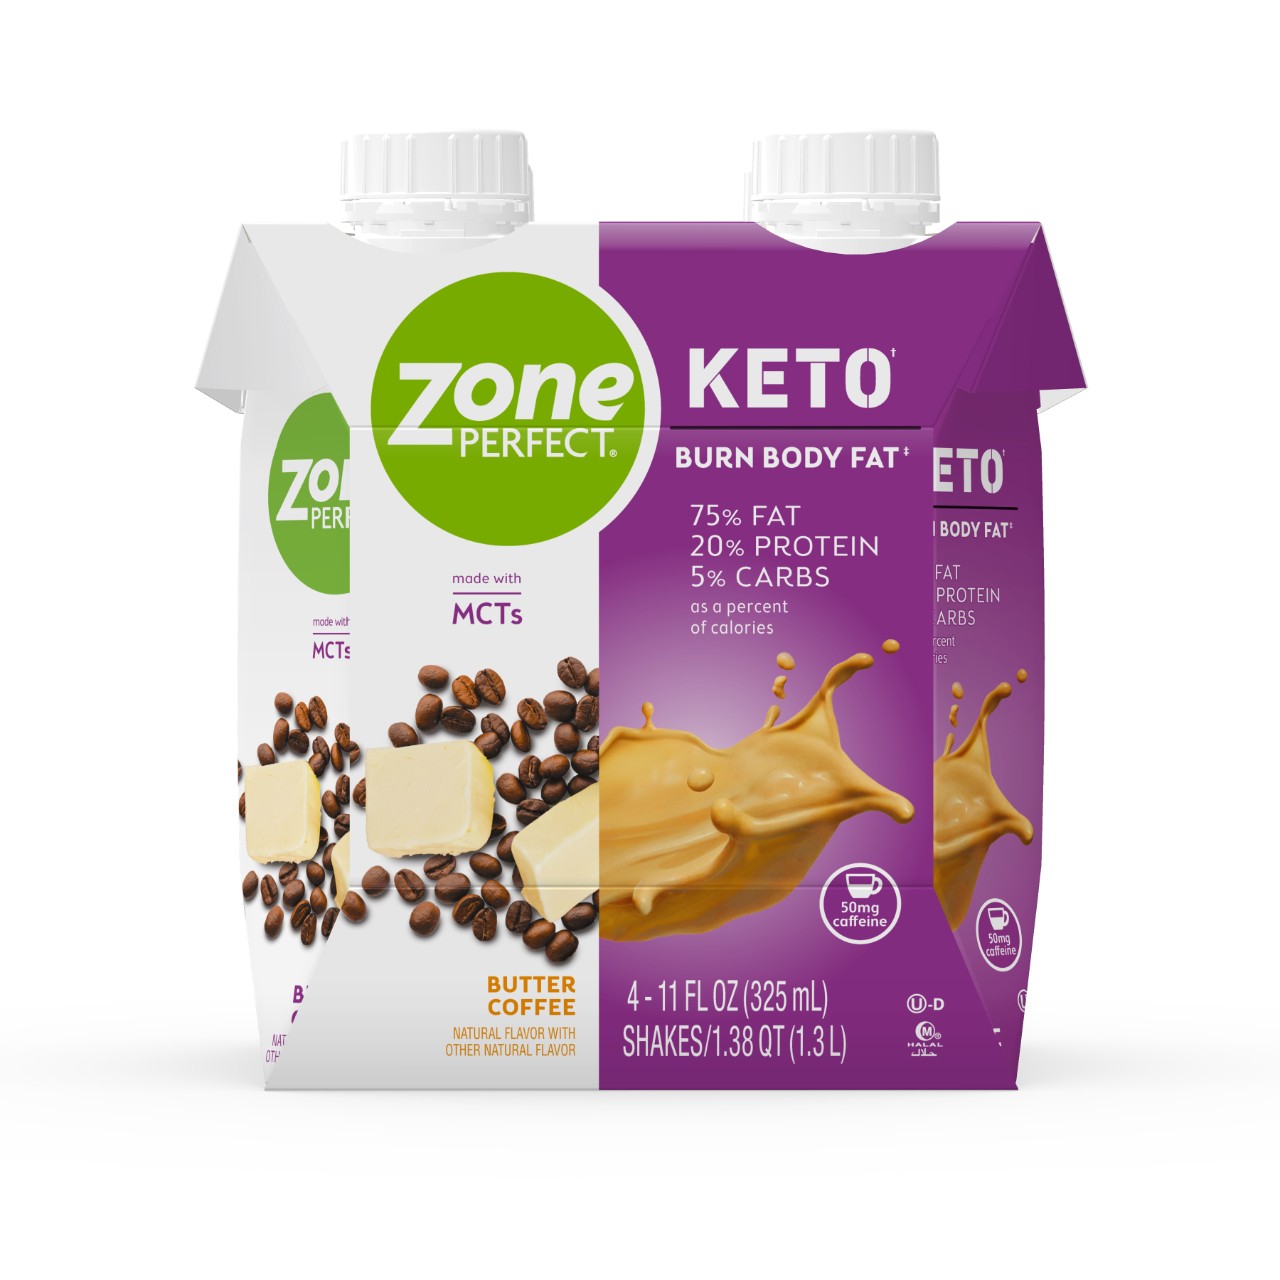 Great-tasting shakes designed to support a ketogenic diet.